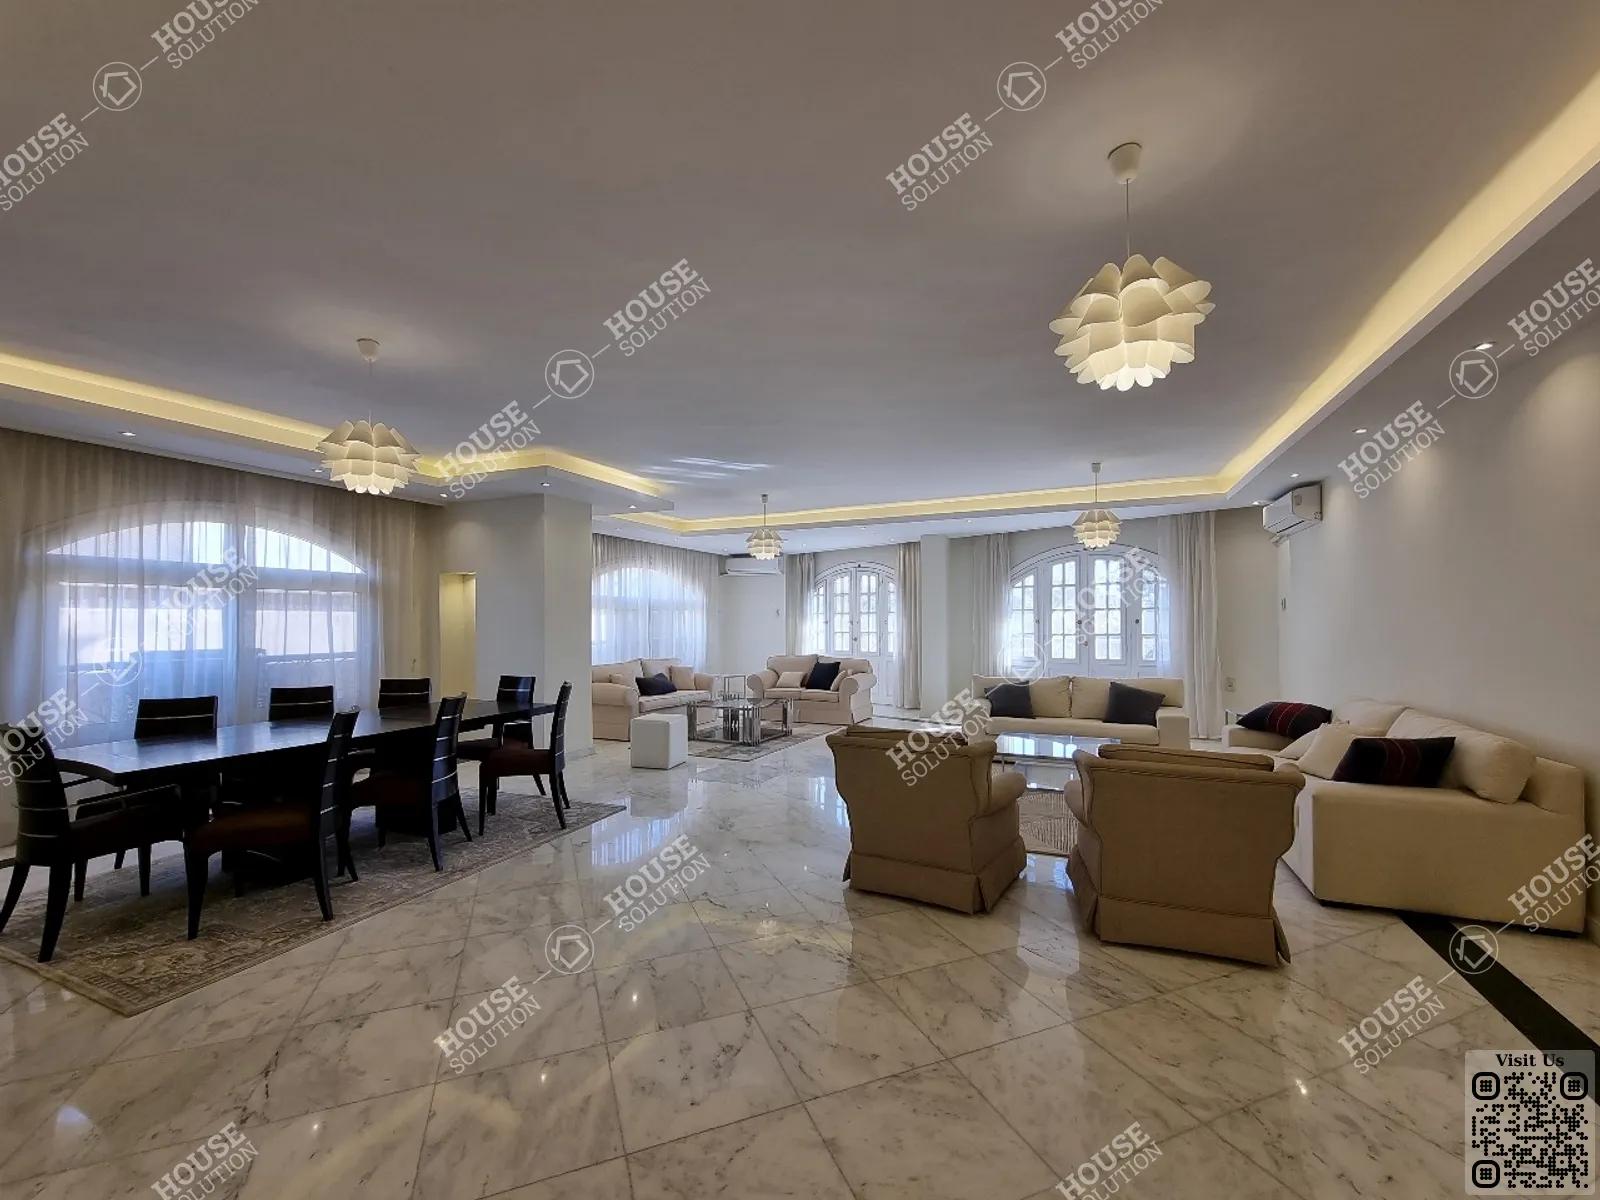 RECEPTION  @ Apartments For Rent In Maadi Maadi Sarayat Area: 250 m² consists of 4 Bedrooms 3 Bathrooms Modern furnished 5 stars #5922-0